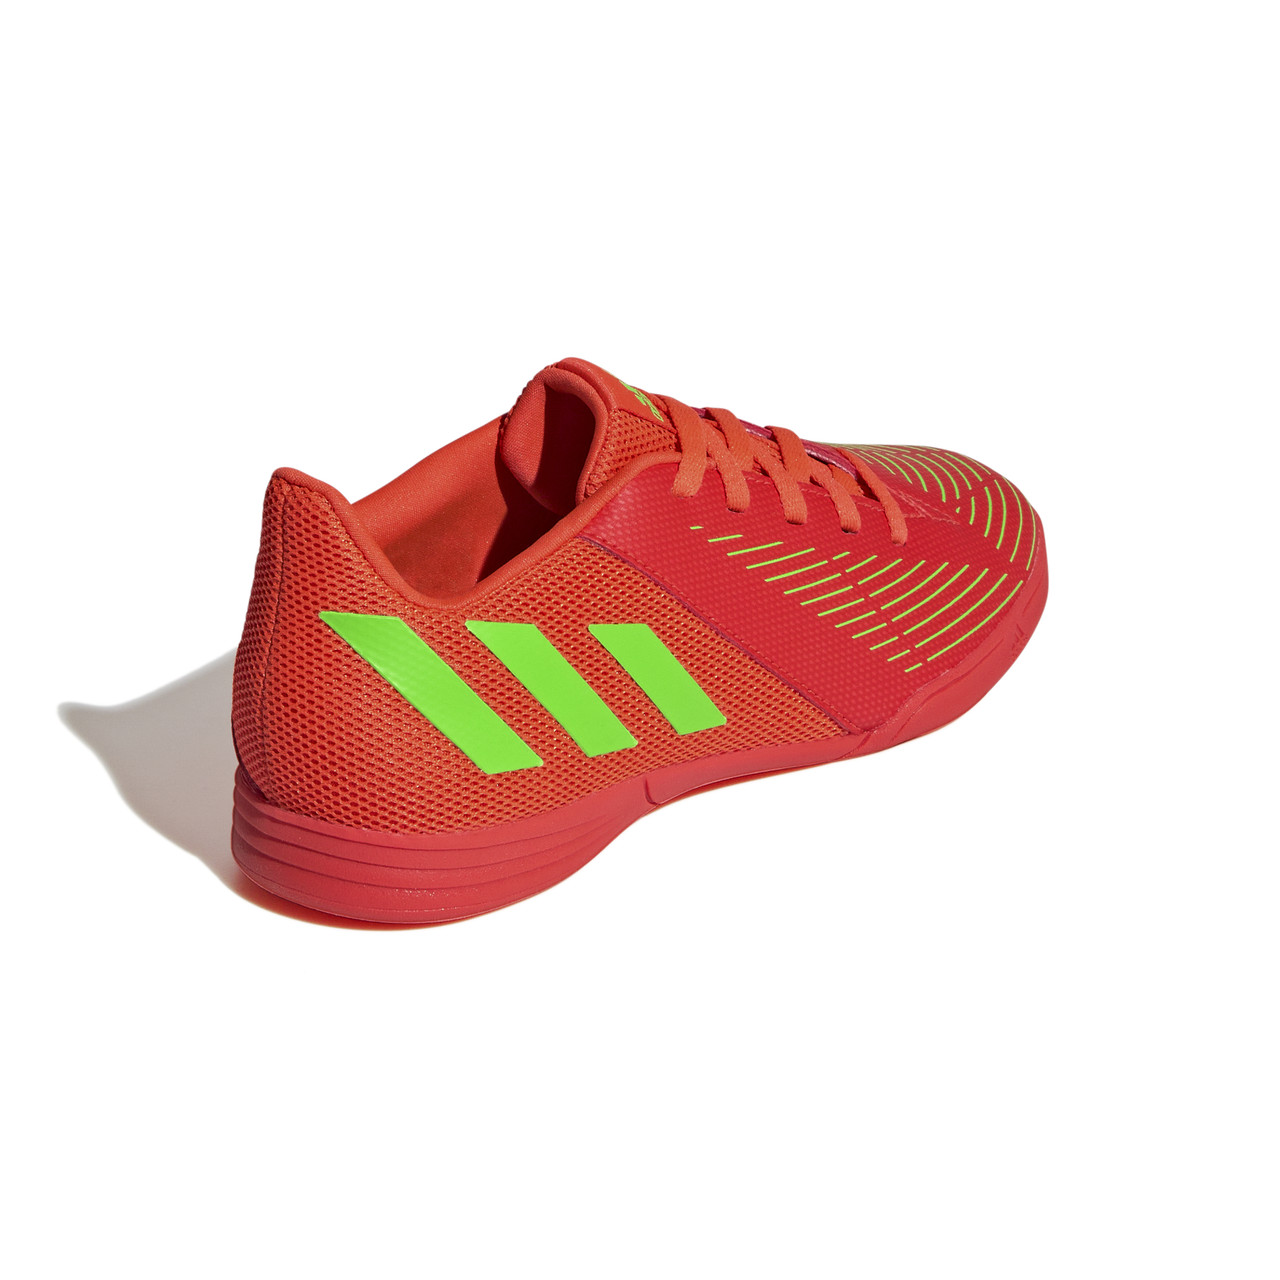 adidas Edge.4 Sala Shoes Youth Version Red - Chicago Soccer